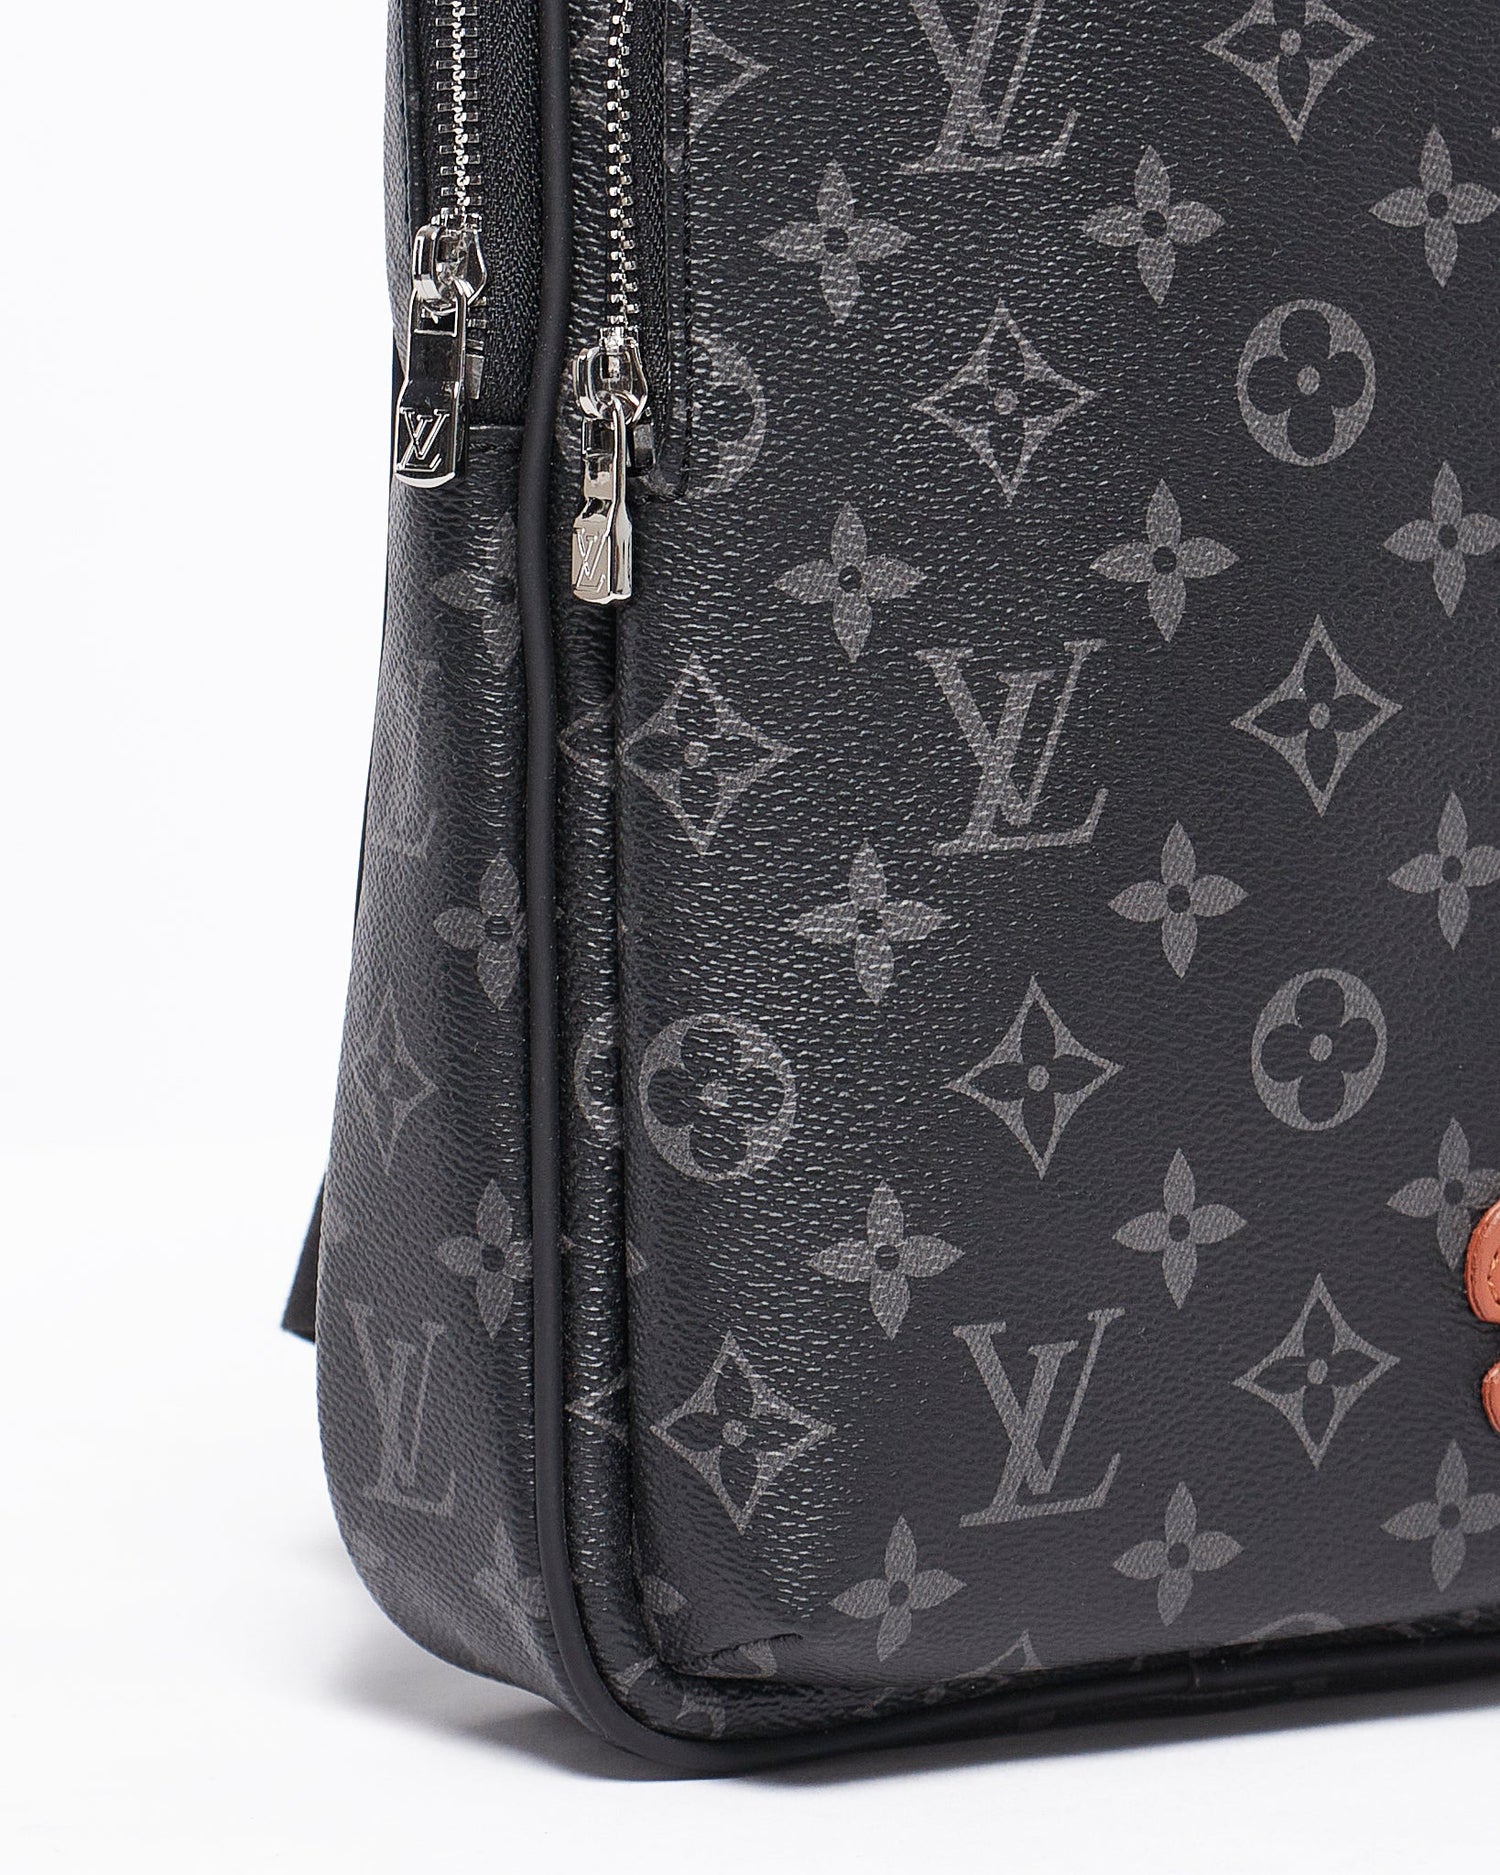 lv sling bag outfit